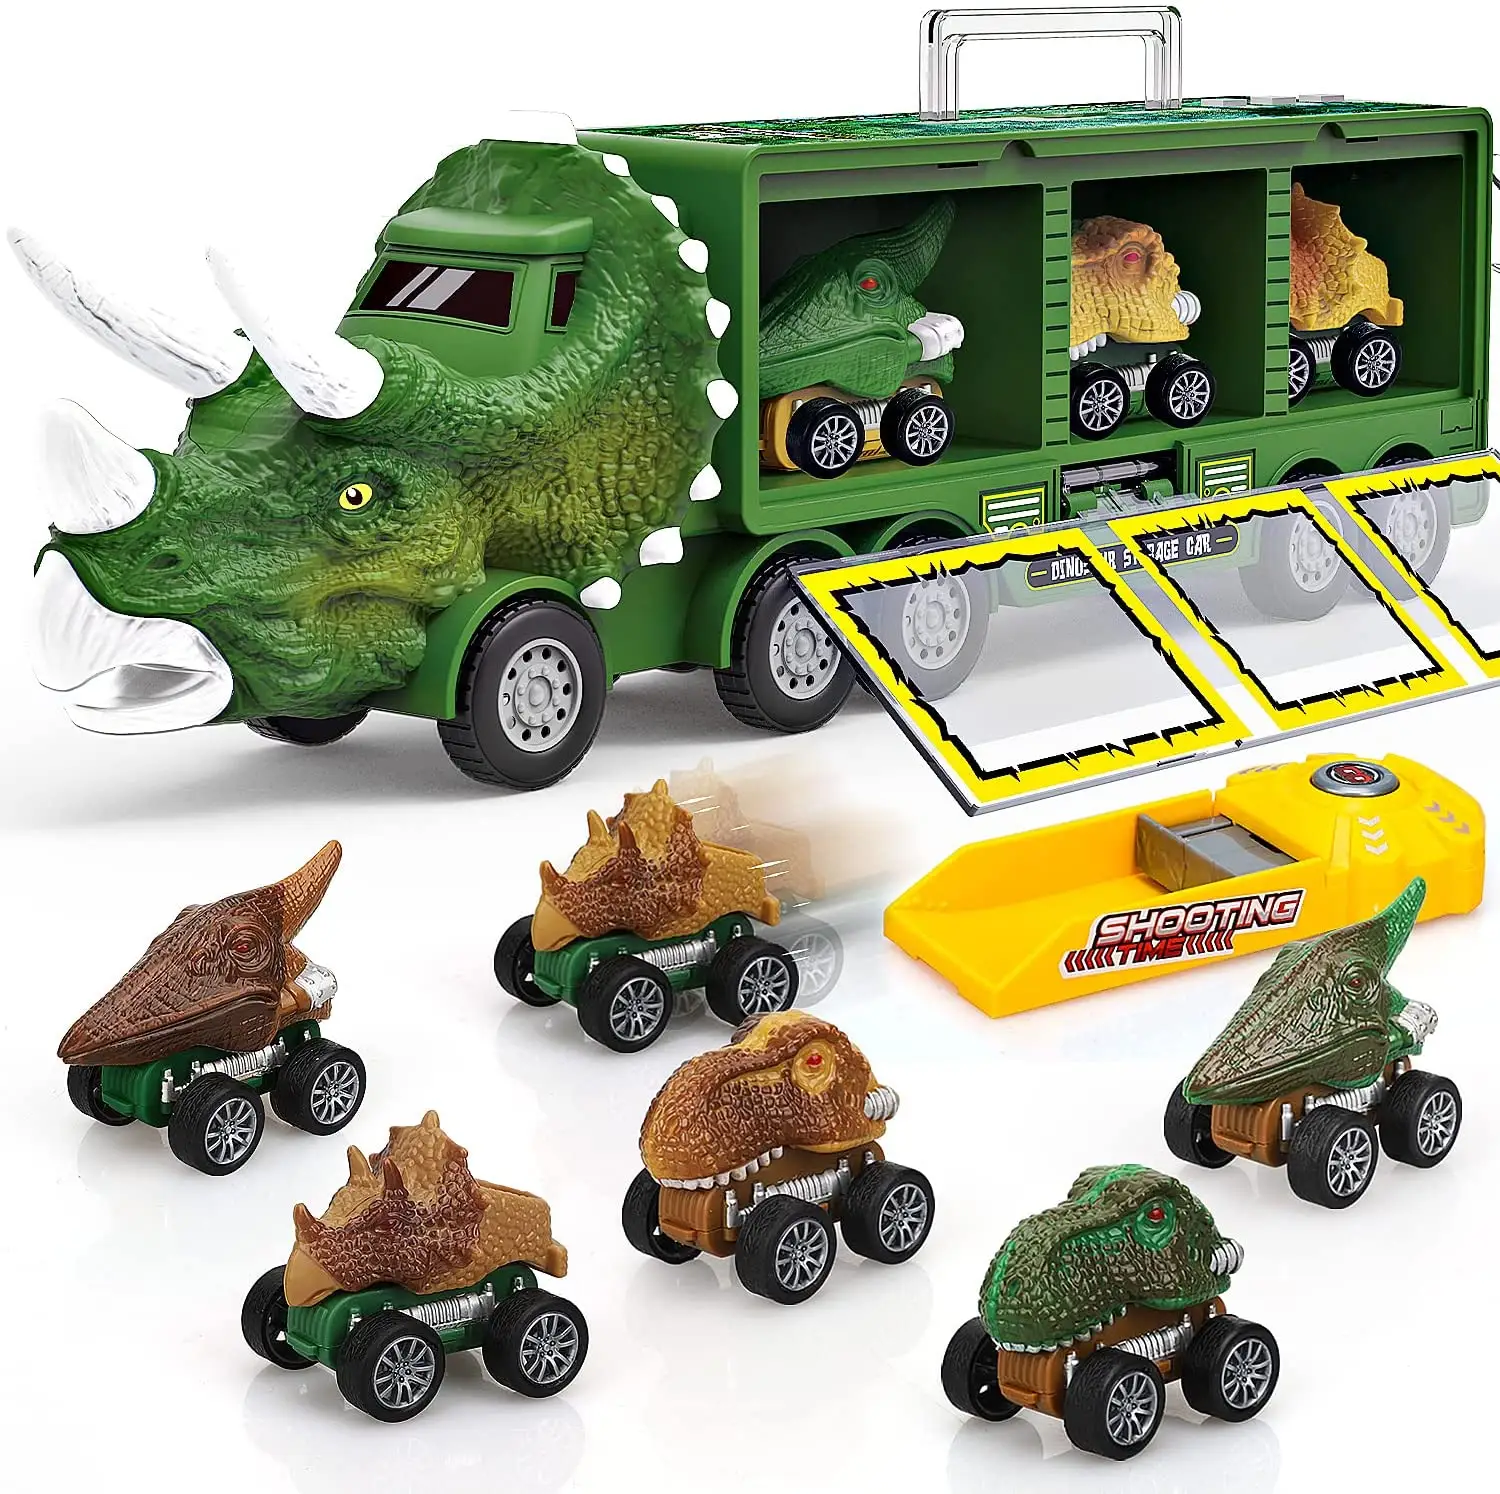 High Speed Launcher Dinosaur Transport Storage Truck with 6 Pull Back Inertia Dinosaur Cars Dino Toys for Kids Boys and Girls